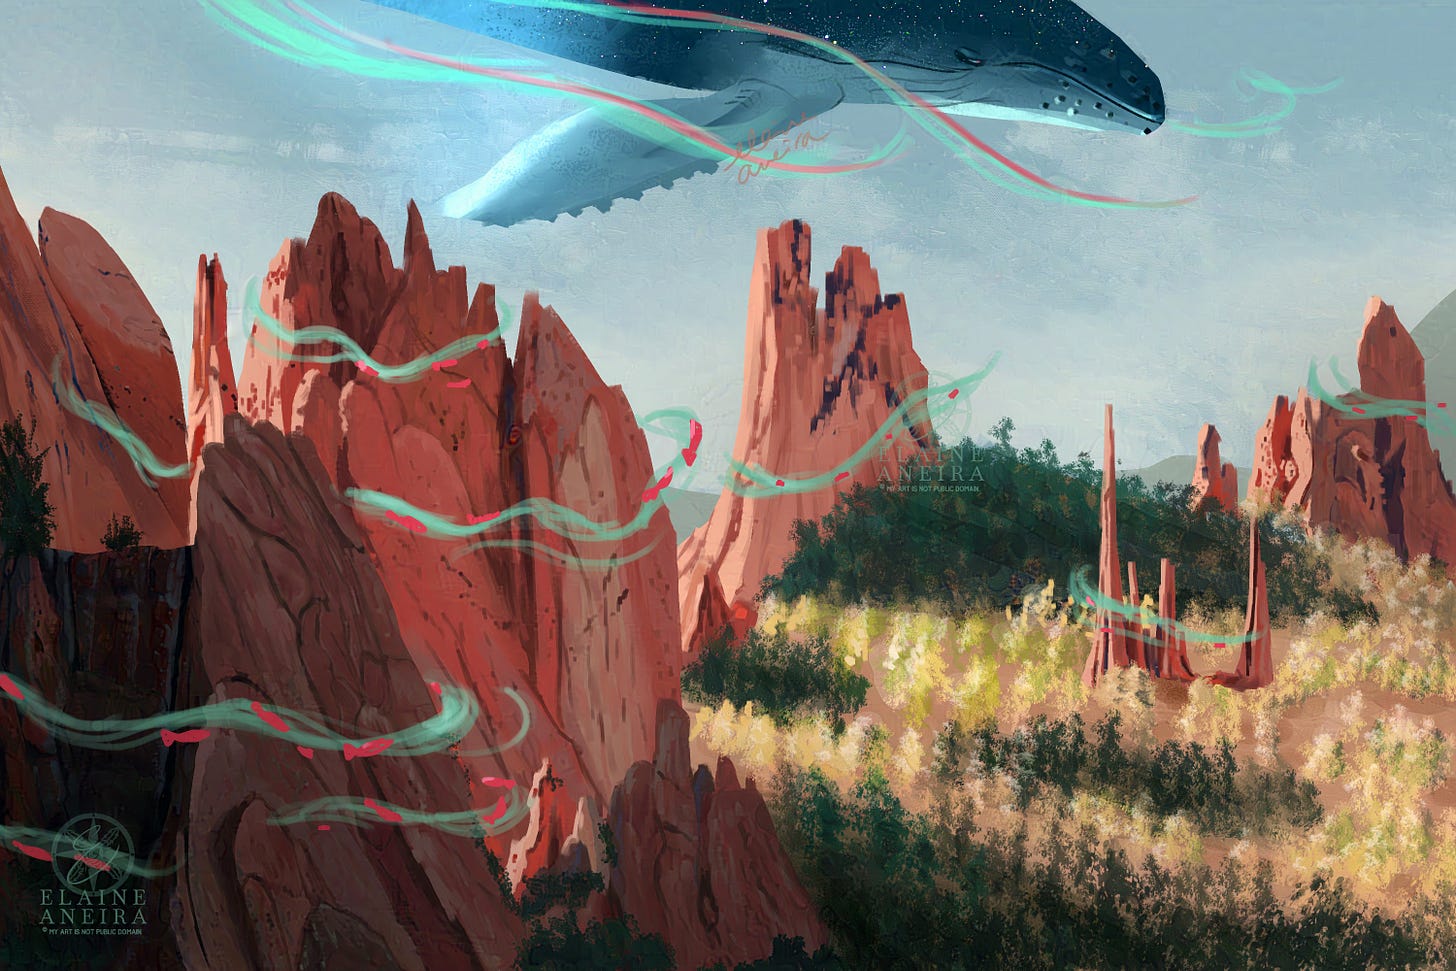 A scenery of rocky mountains and fantastical wisps around them. Pink fishes are seen swimming along the wisps. Above, there's a humpback whale flying through the air. It has stars on its back.